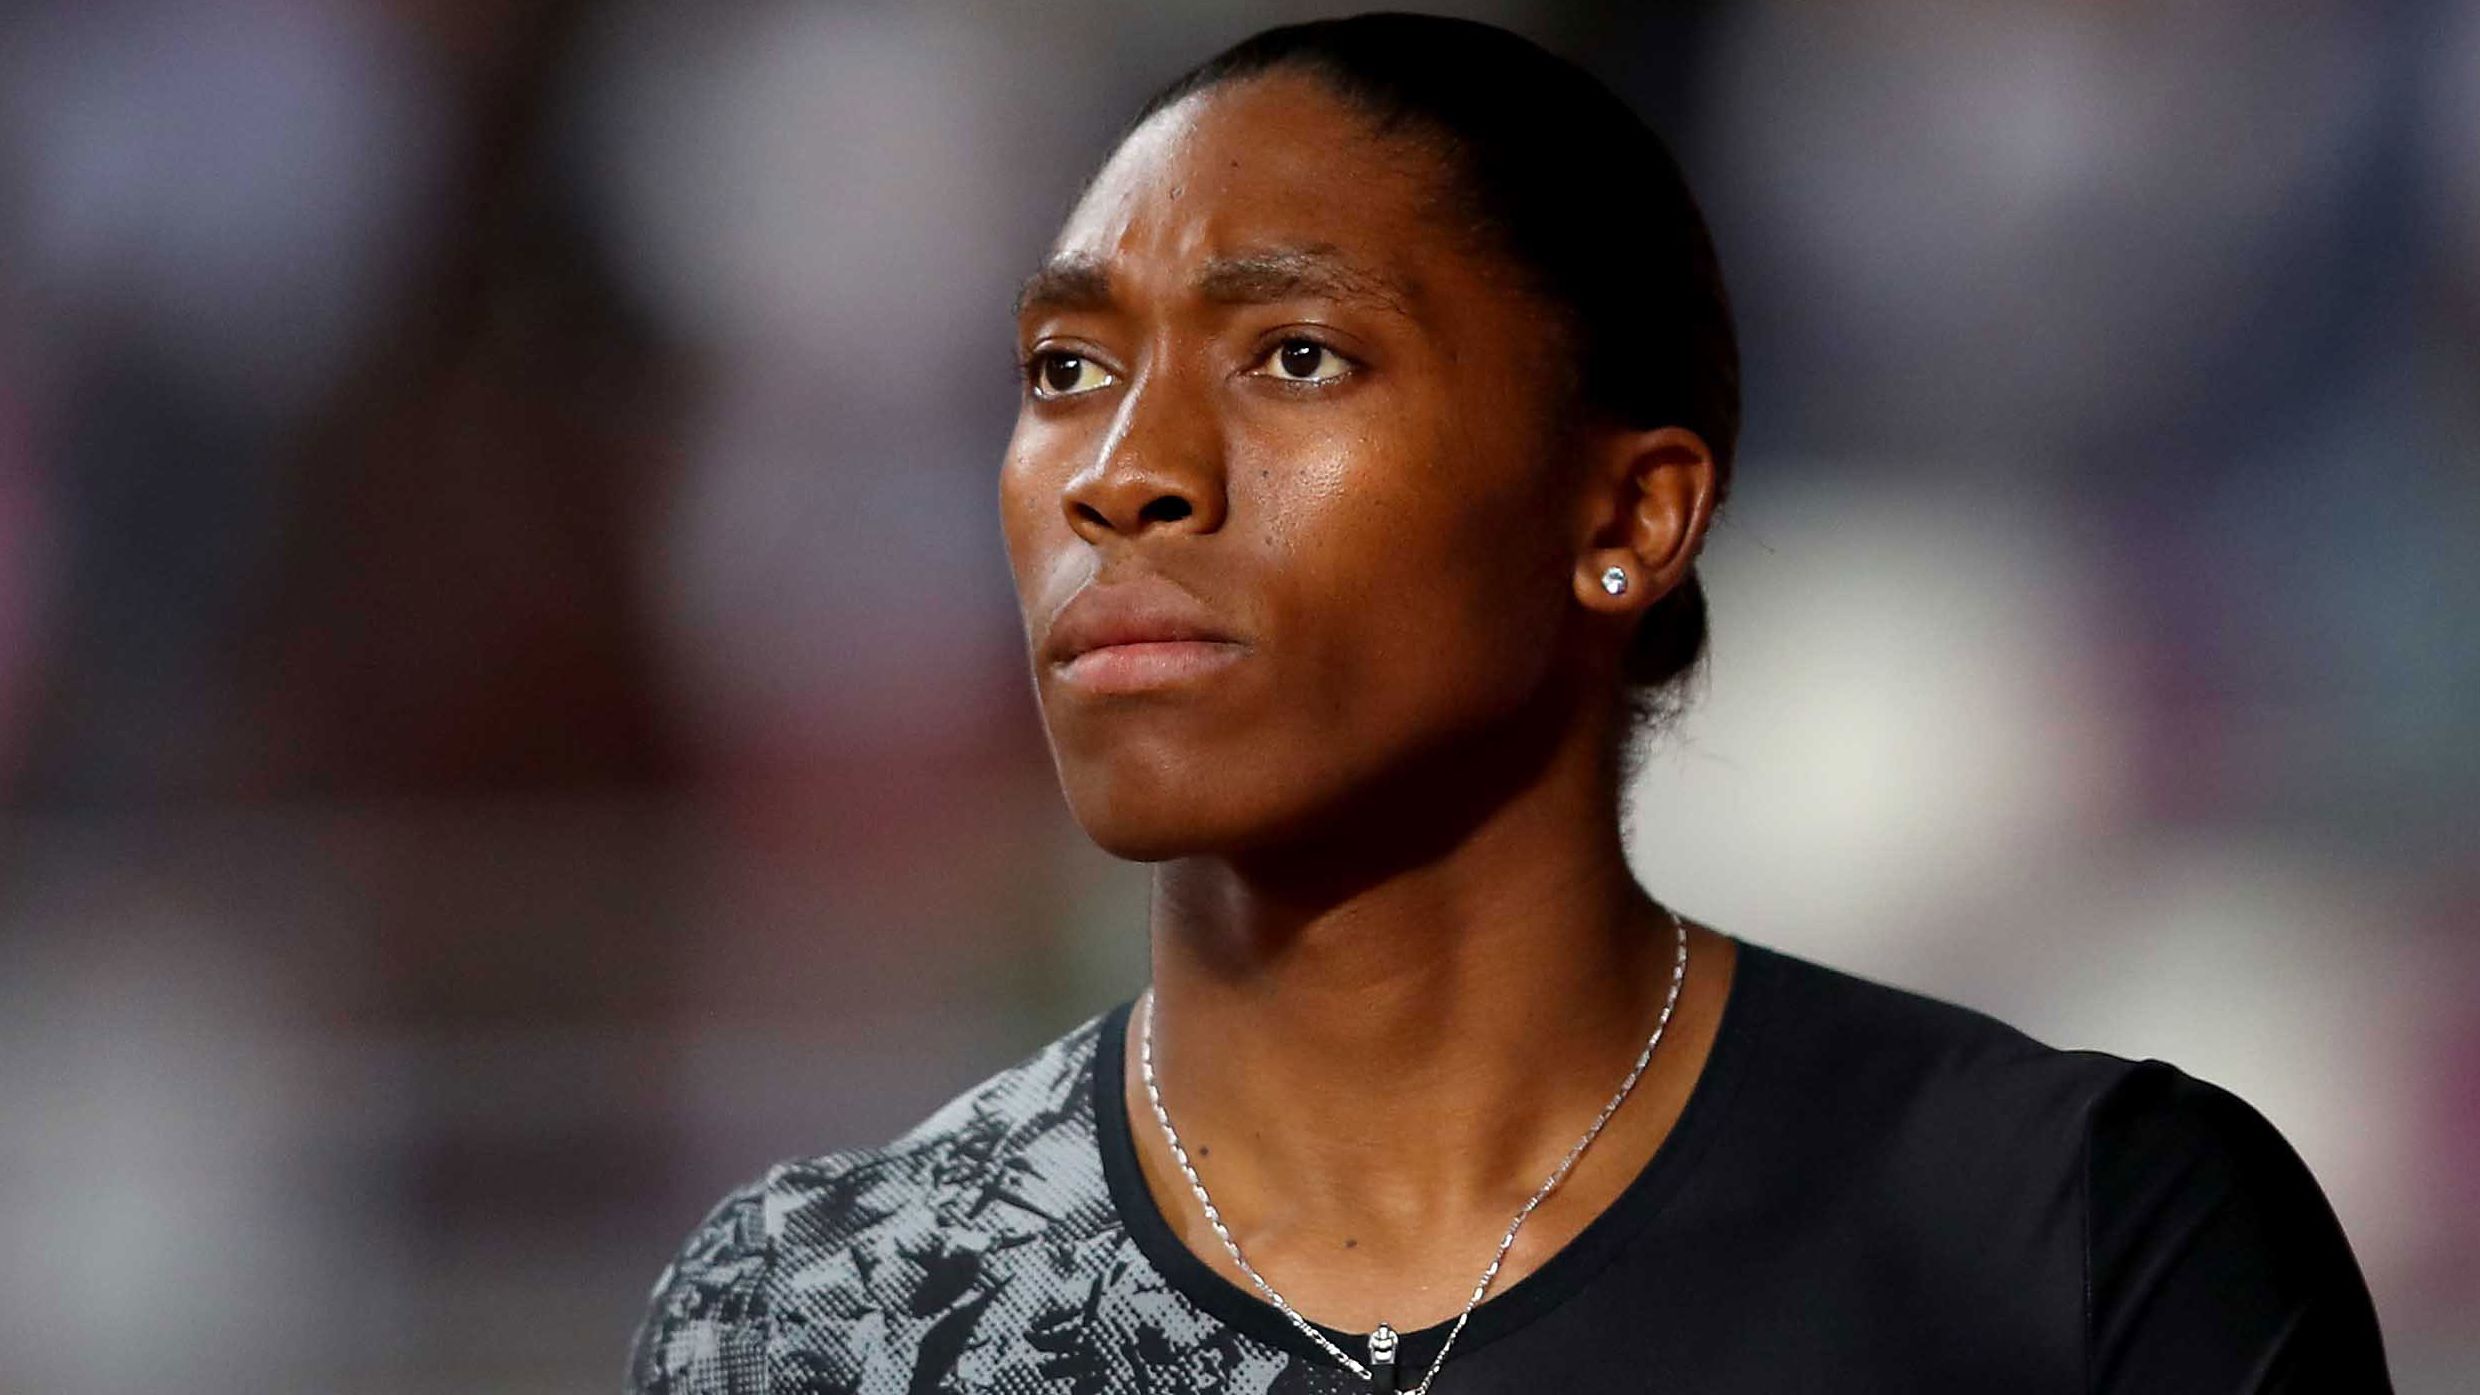 Caster Semenya has turned to the European Court of Human Rights after losing two earlier appeals against "discriminatory" limits on testosterone.